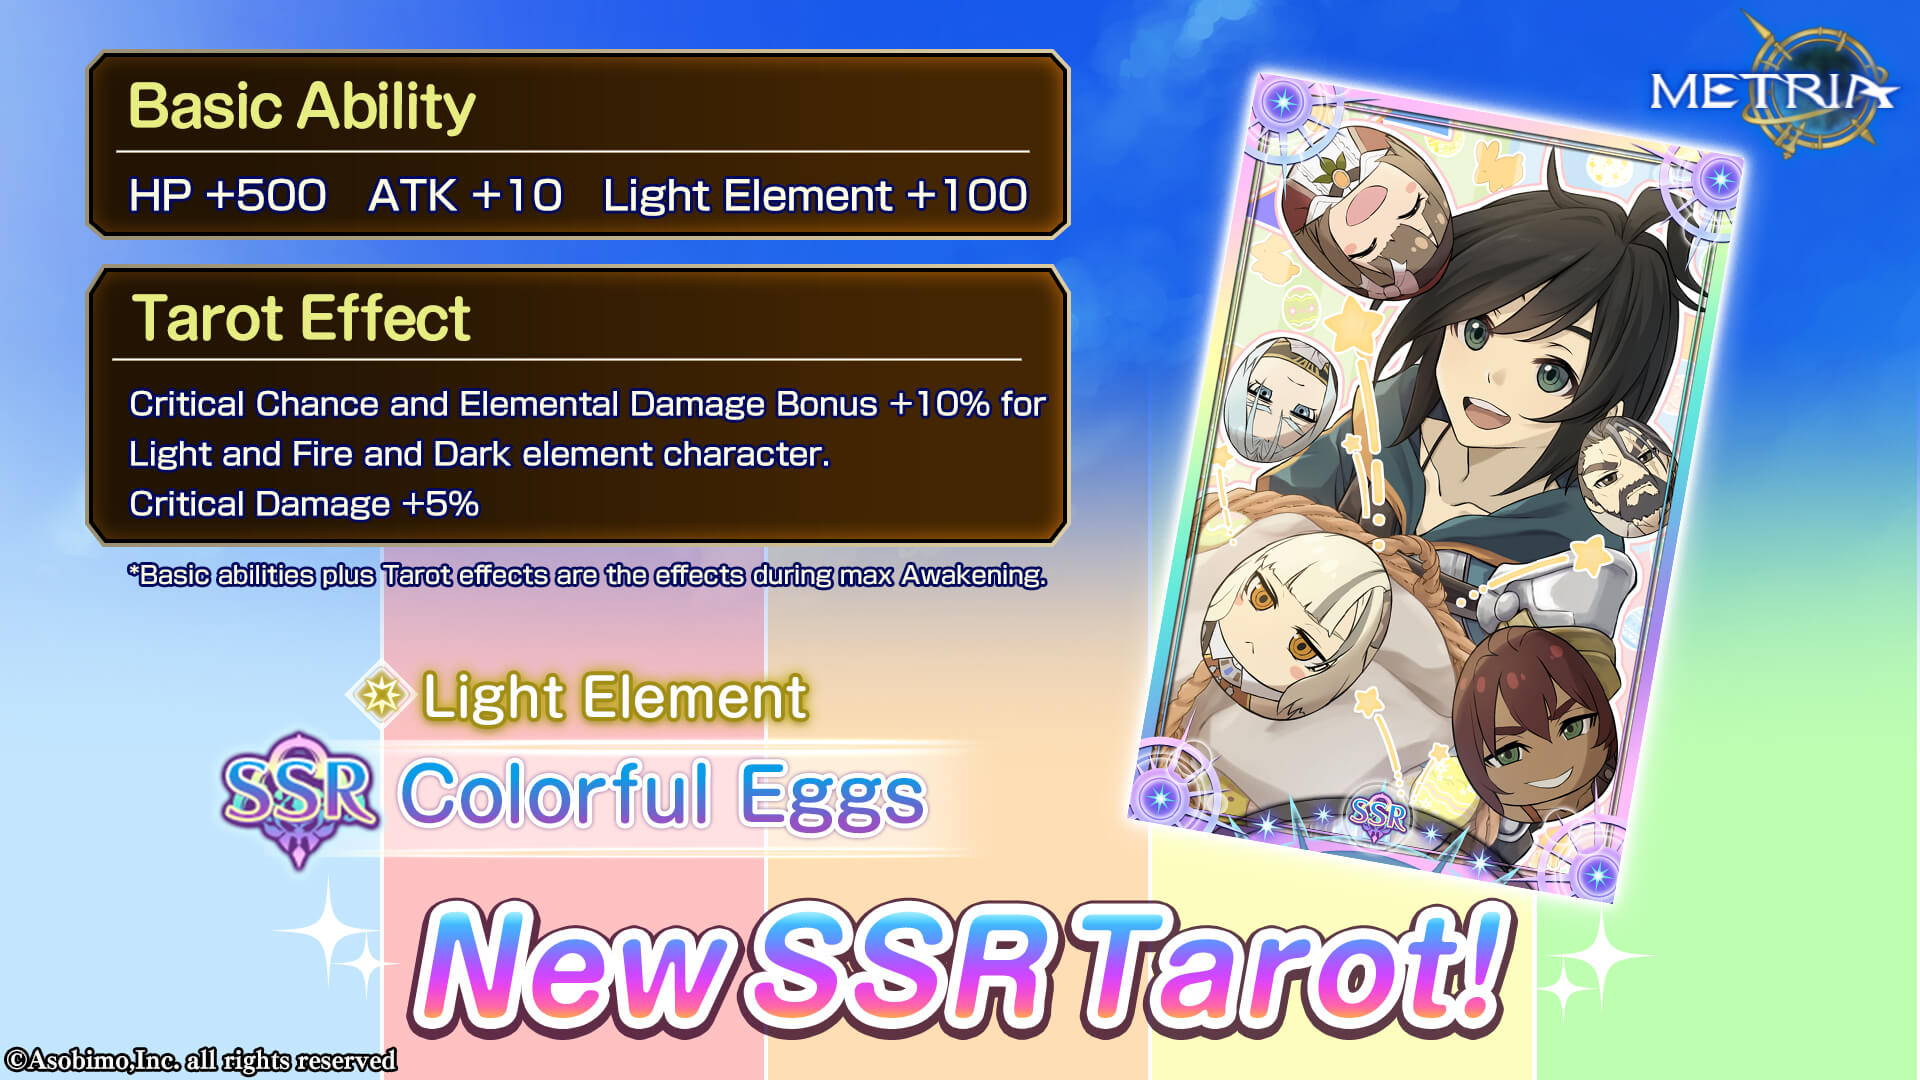 Light Element New SSR Tarot: "Colorful Eggs" Available for Purchase!